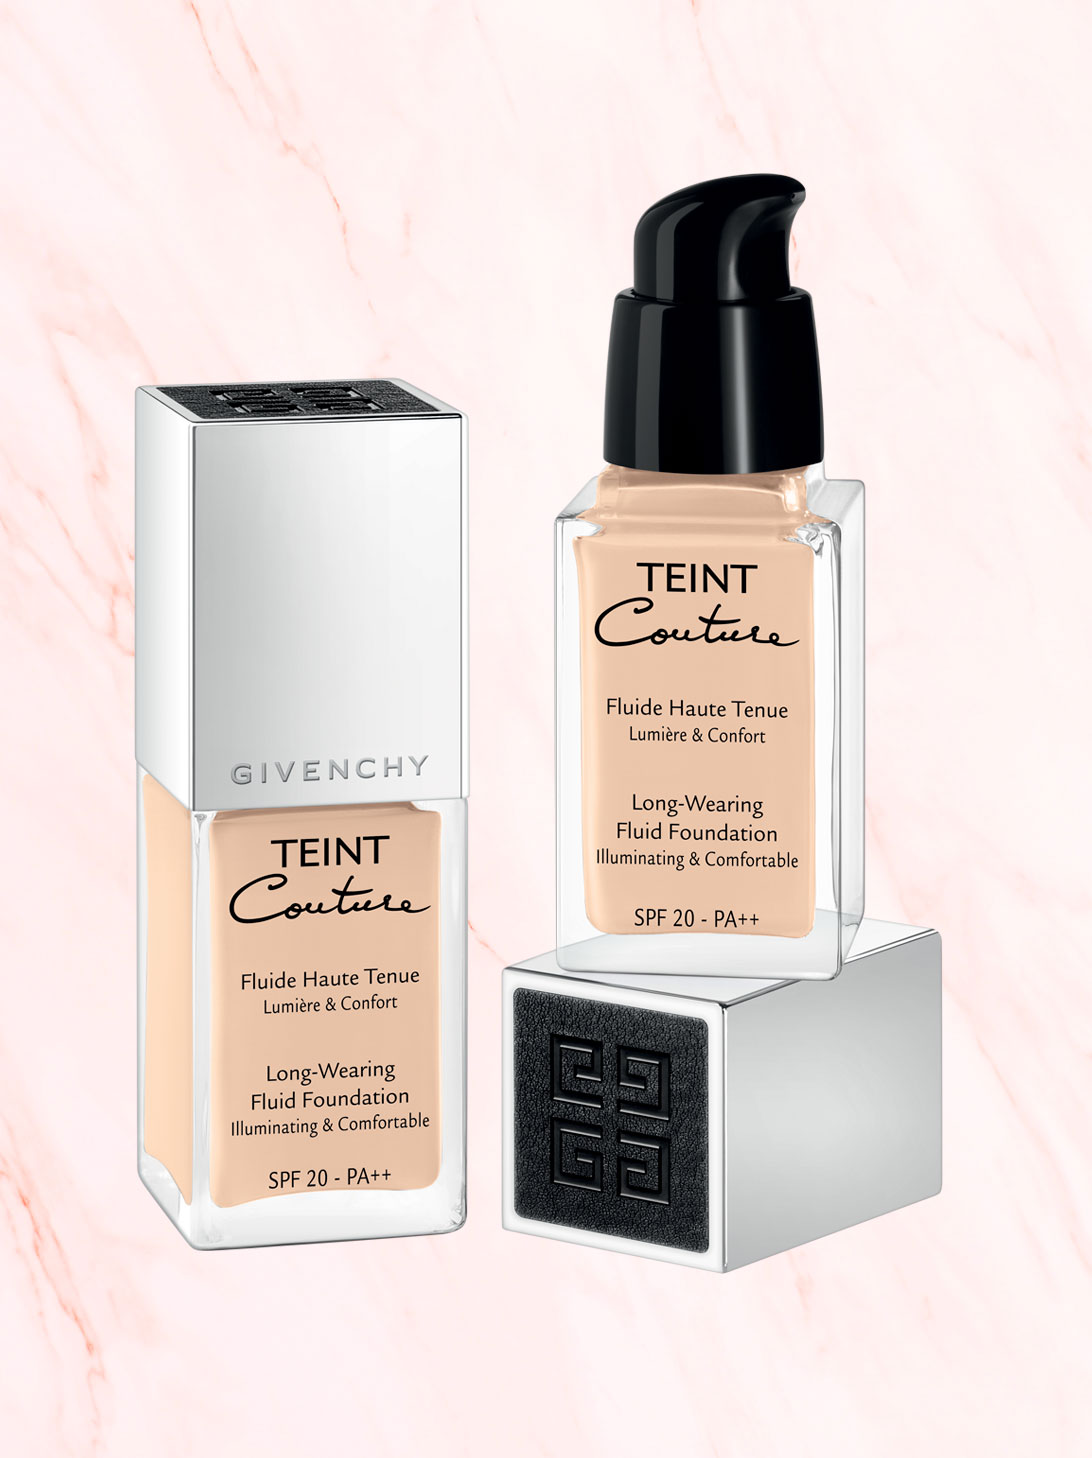 TEINT COUTURE FLUID • Long-Wearing Fluid Foundation SPF 20 - PA++ ∷ GIVENCHY